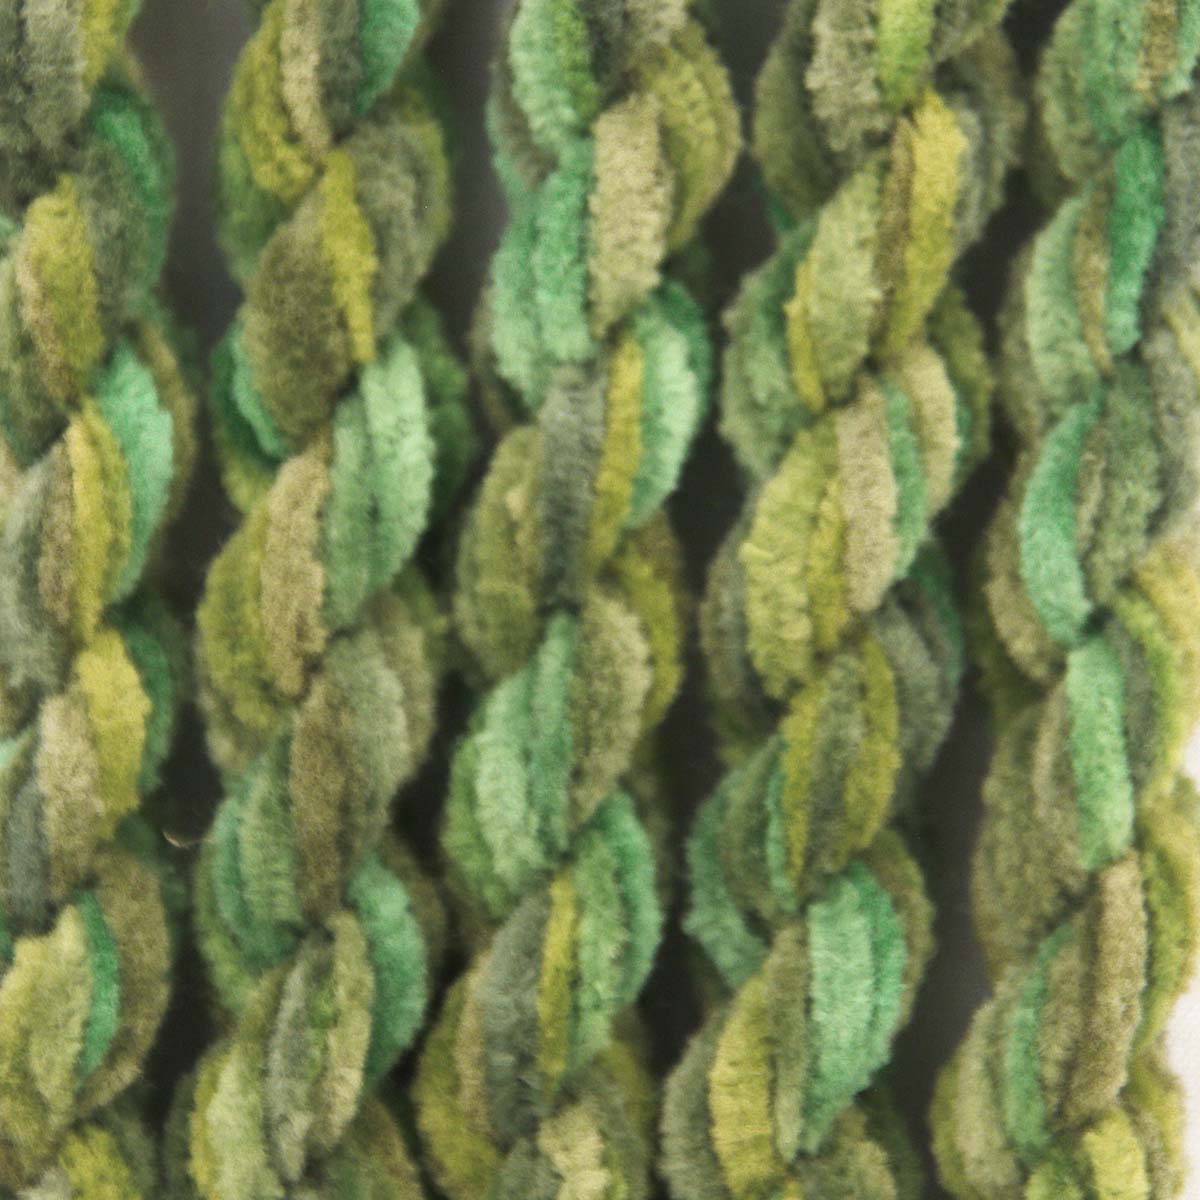 www.colourstreams.com.au Colour Streams Hand Dyed Chenille Threads Slow Stitch Embroidery Textile Arts Fibre DL 49 Olivades Olives Greens